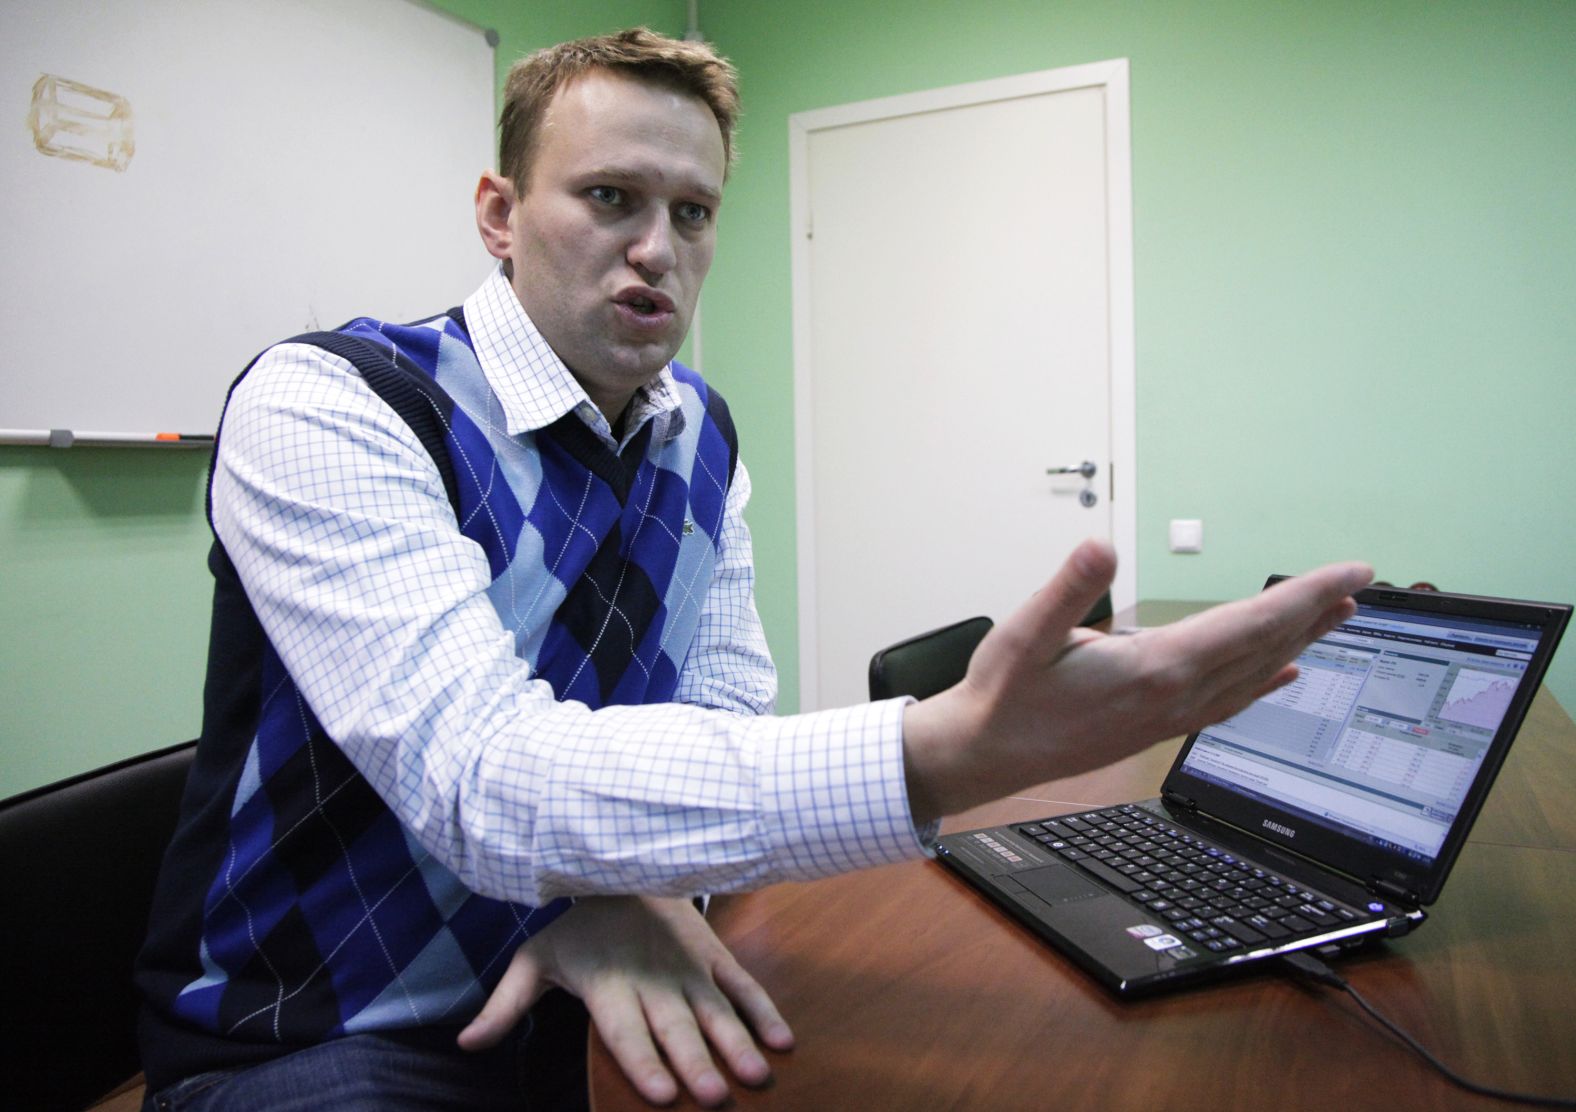 Navalny speaks in his office in Moscow in 2009. He used his blog and social media to expose alleged corruption in the Kremlin and Russian business.